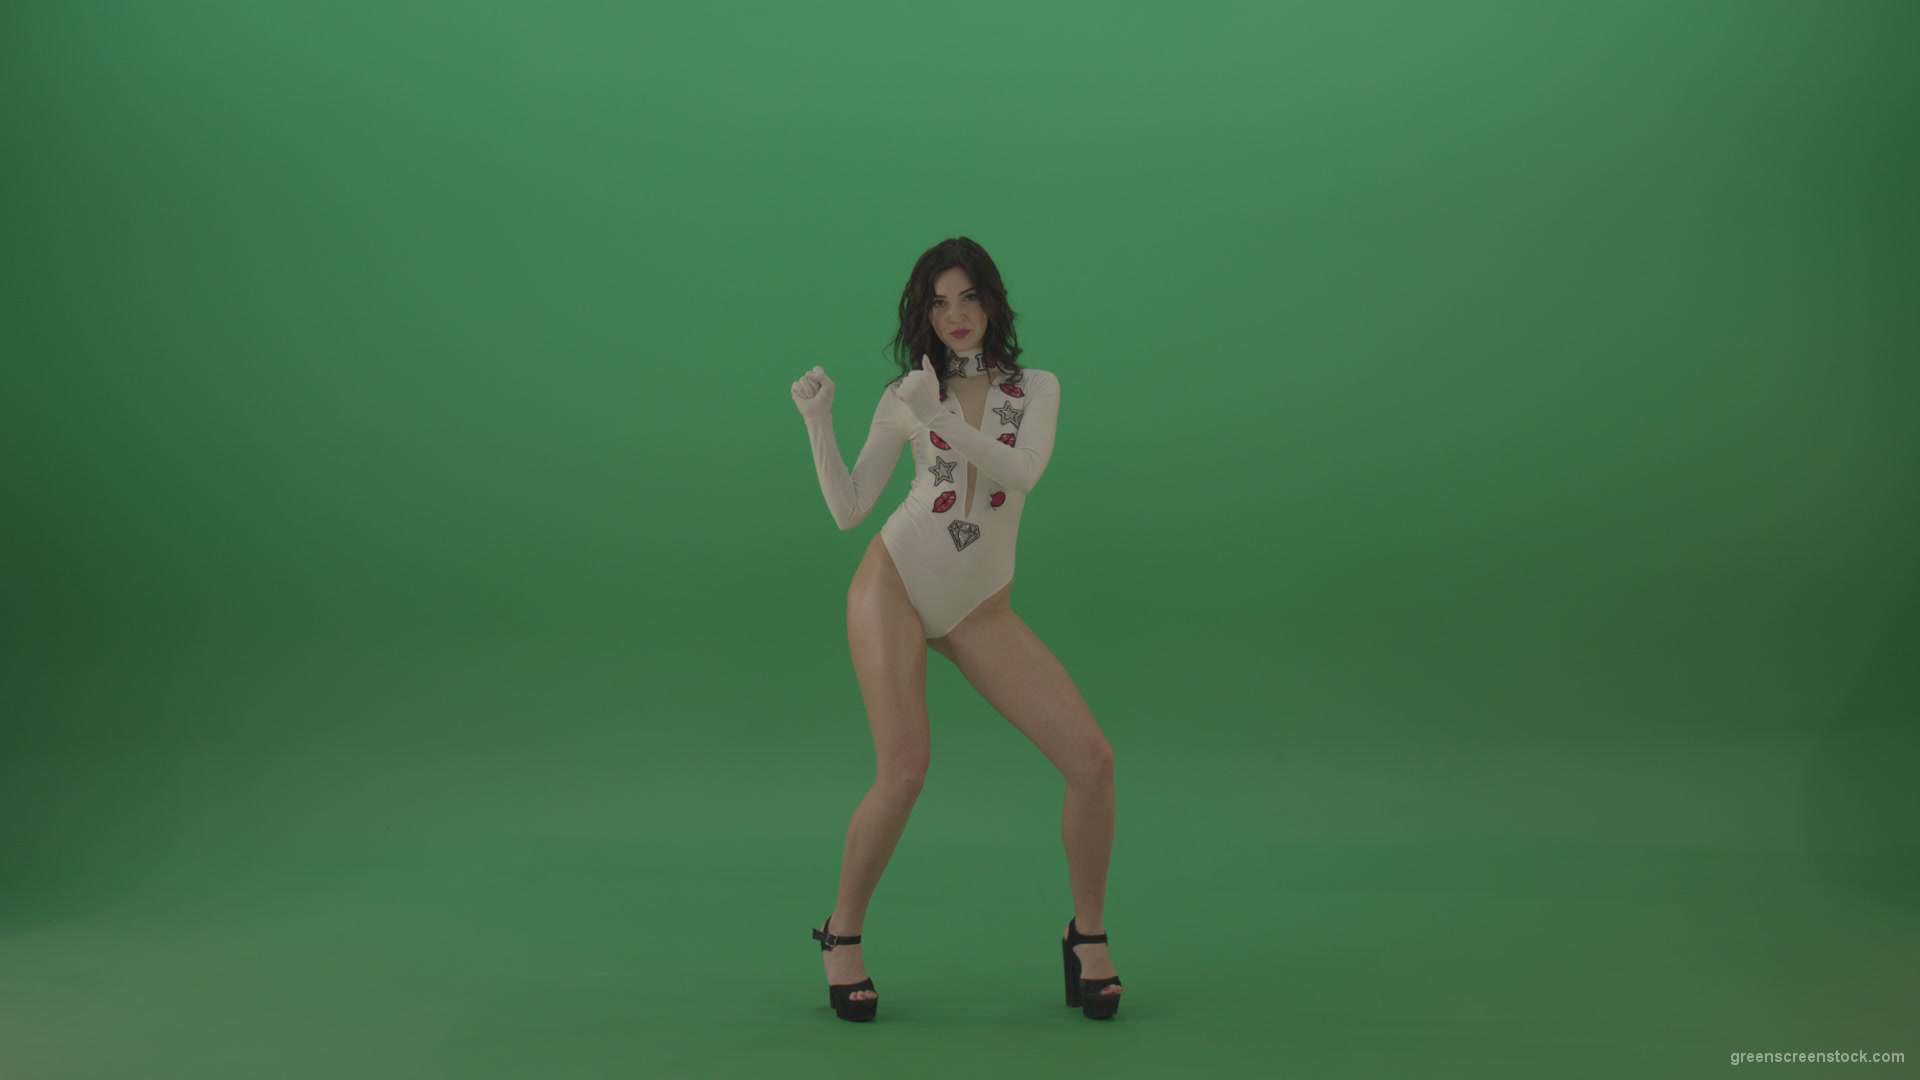 Sexy-woman-in-white-body-seductive-dance-on-green-background_001 Green Screen Stock